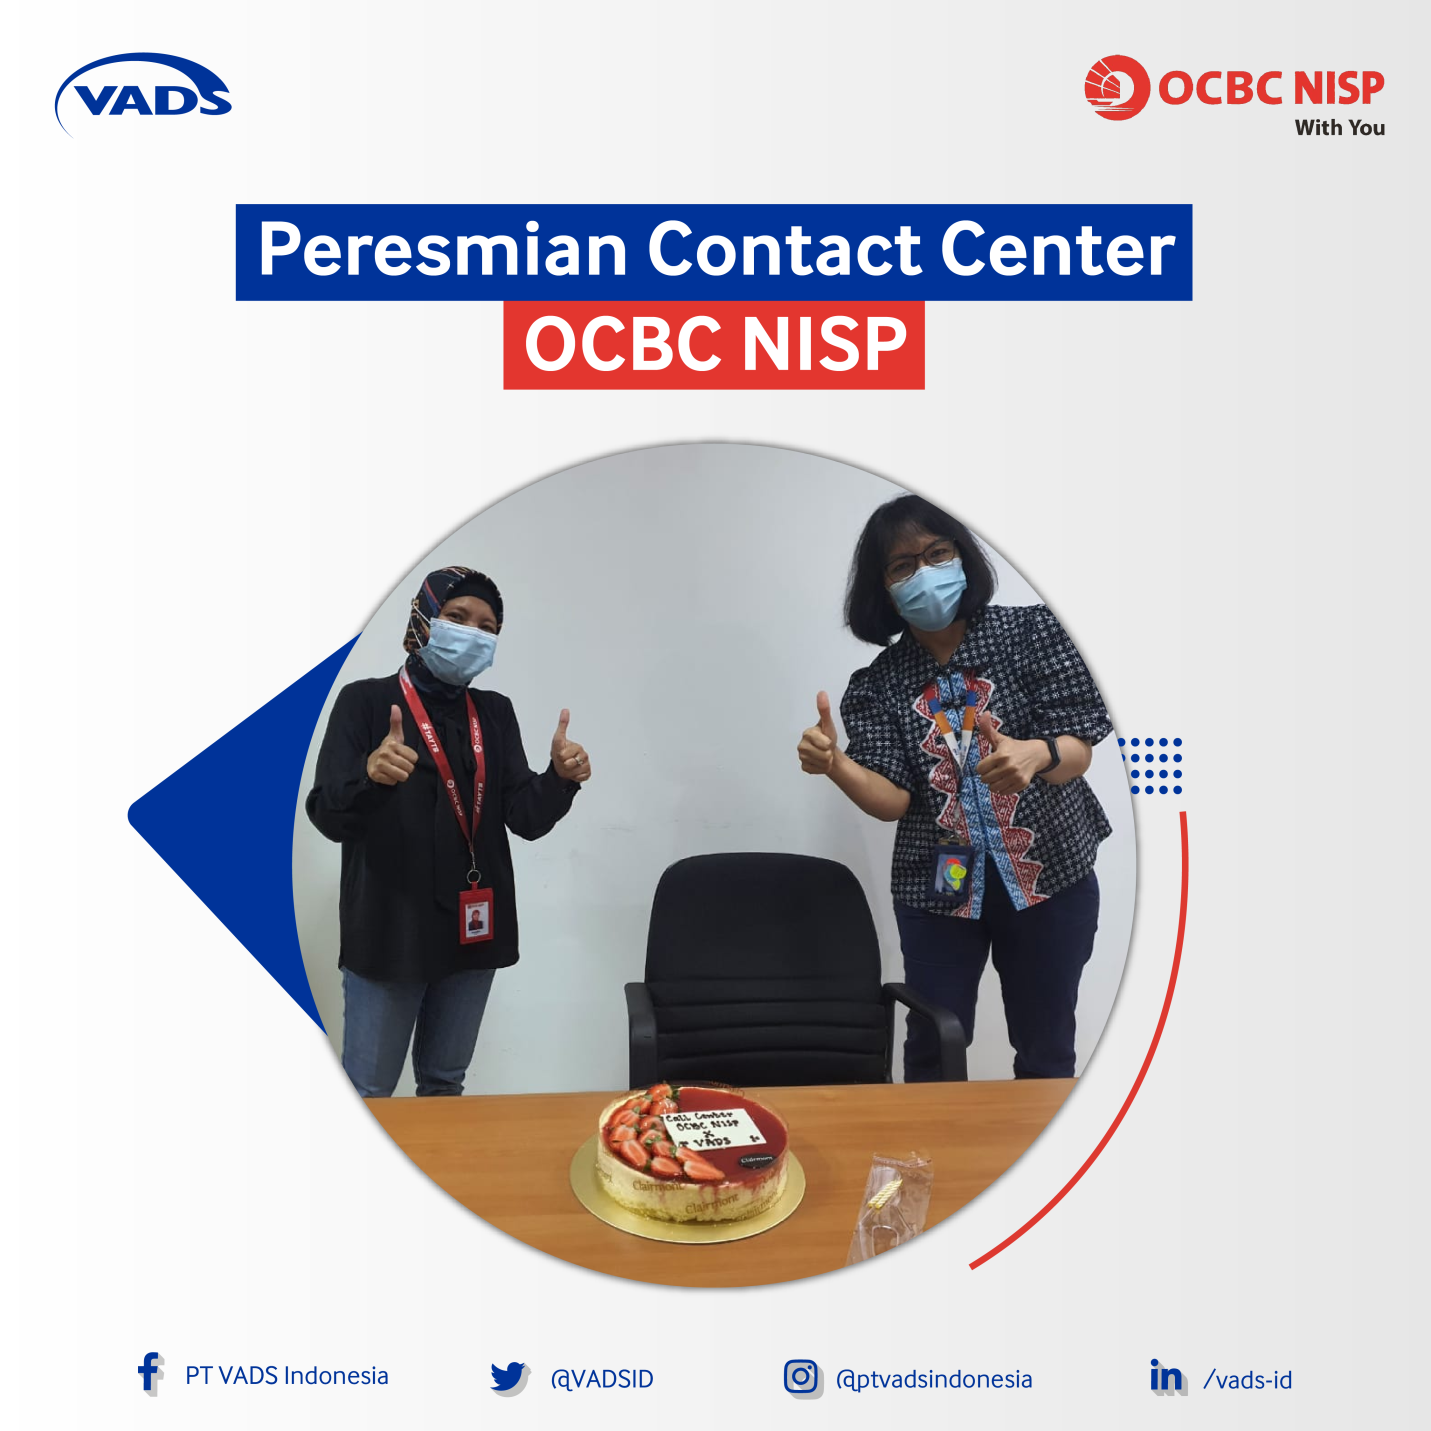 Image of Bank OCBC NISP Collaborates with VADS Indonesia to Strengthen 24-Hour Contact Center Services